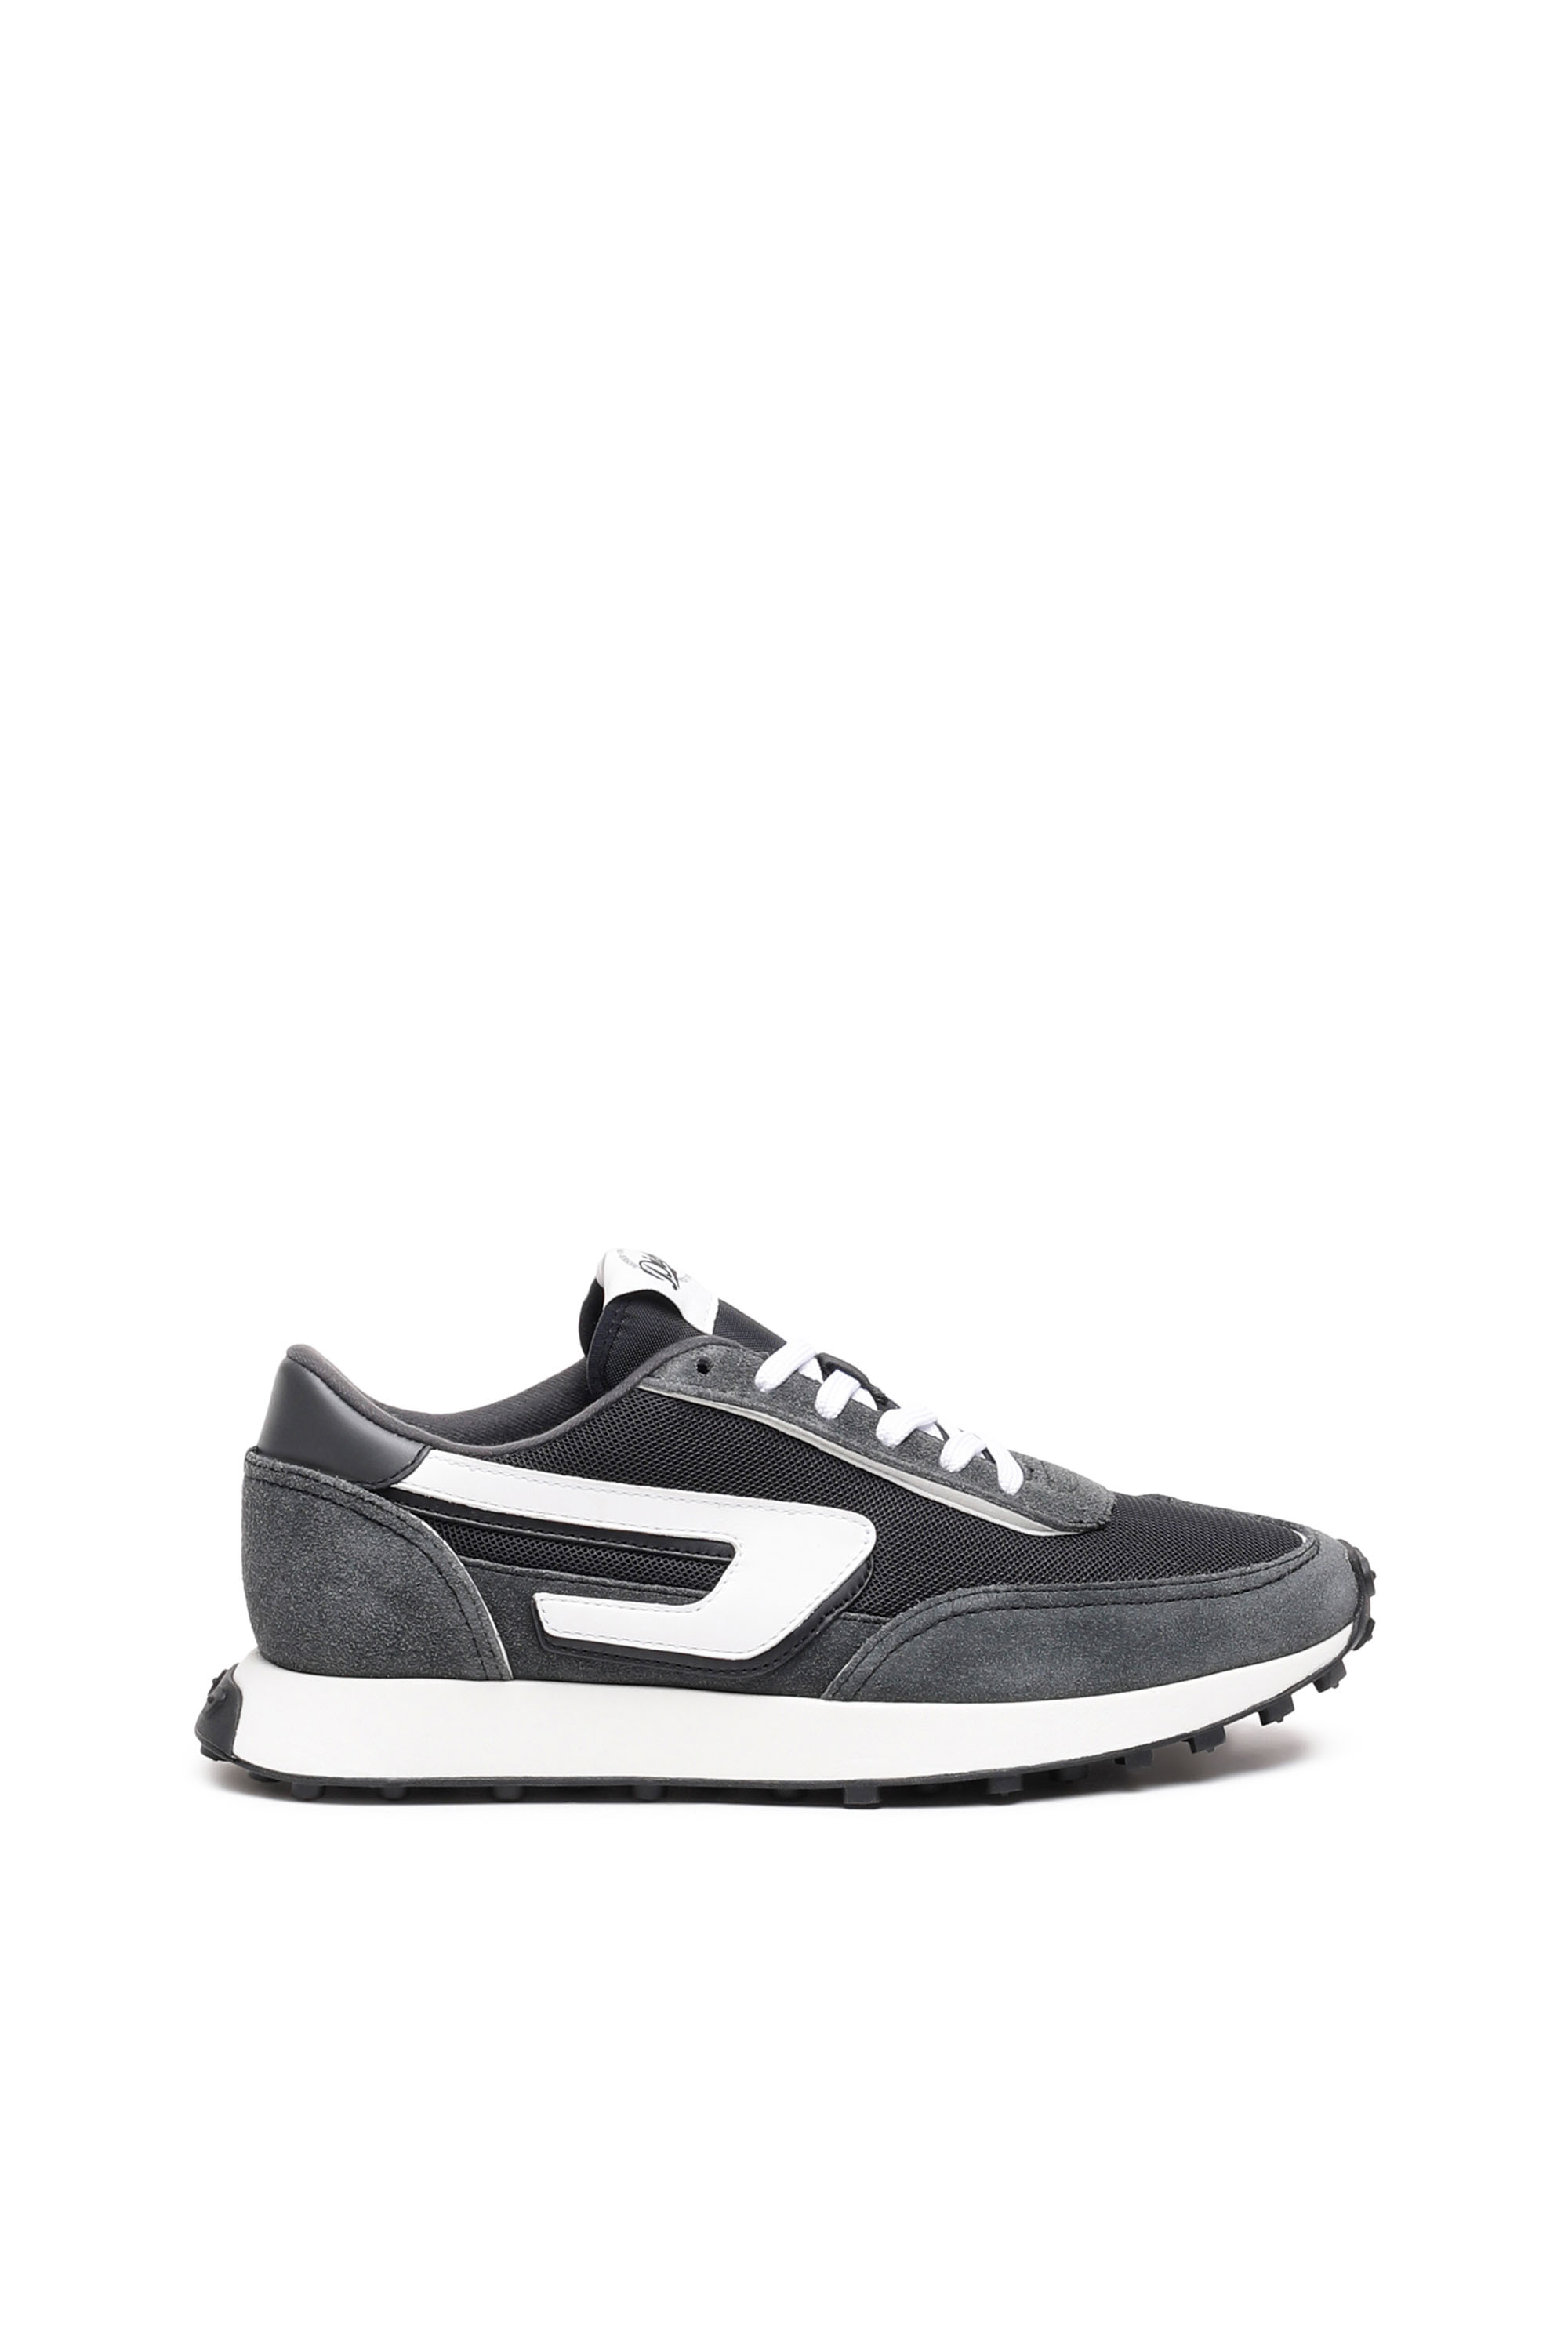 Diesel - S-Racer Lc W - Sneakers in mesh, suede and leather - Sneakers - Woman - Black